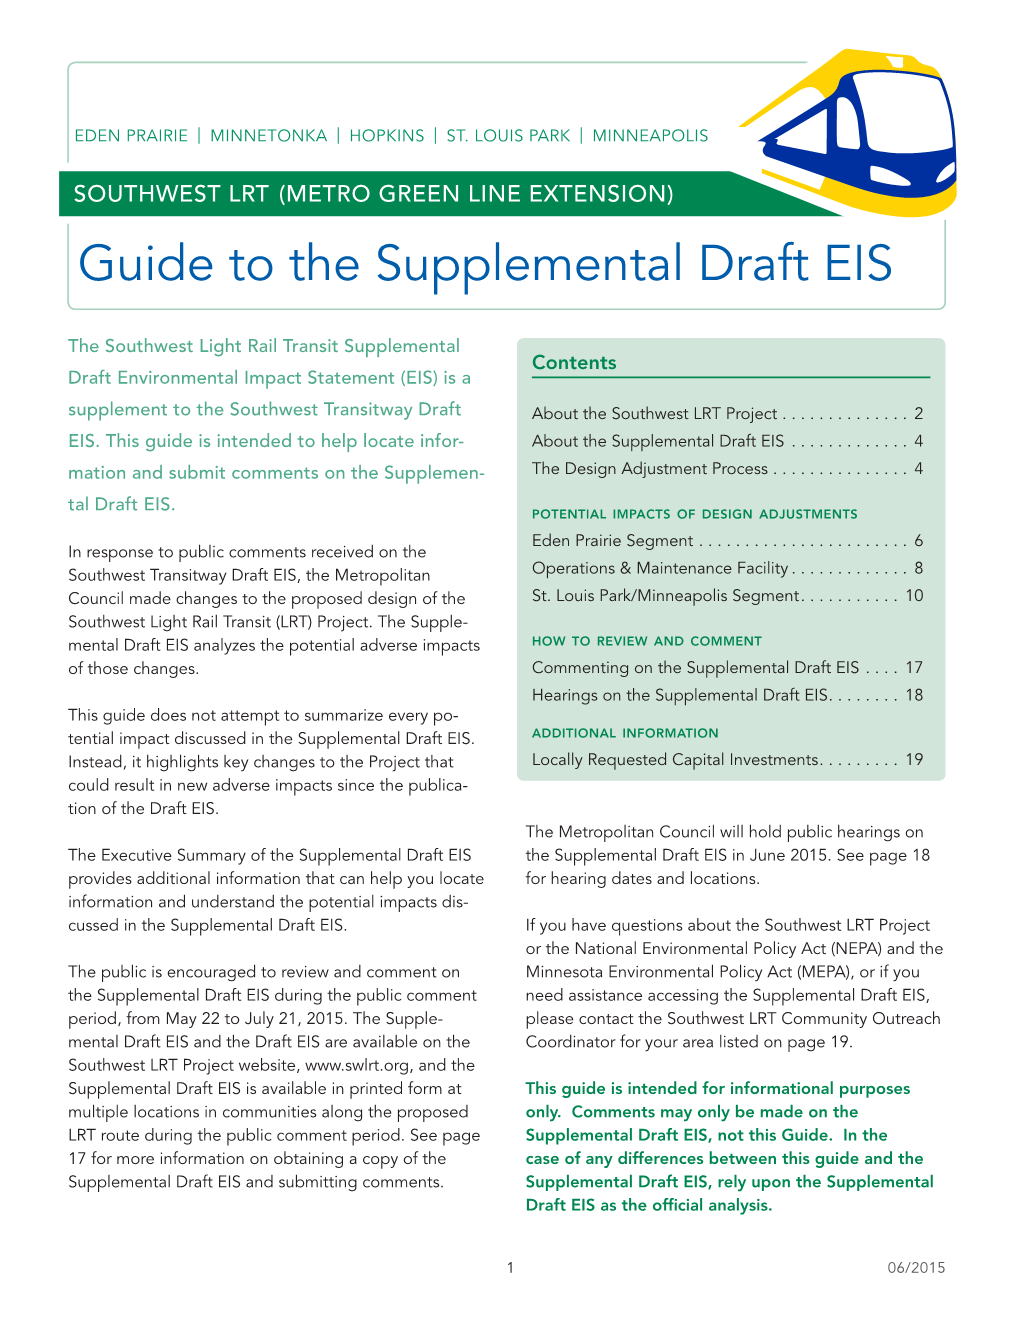 Guide to the Southwest LRT Supplemental Draft EIS (English)